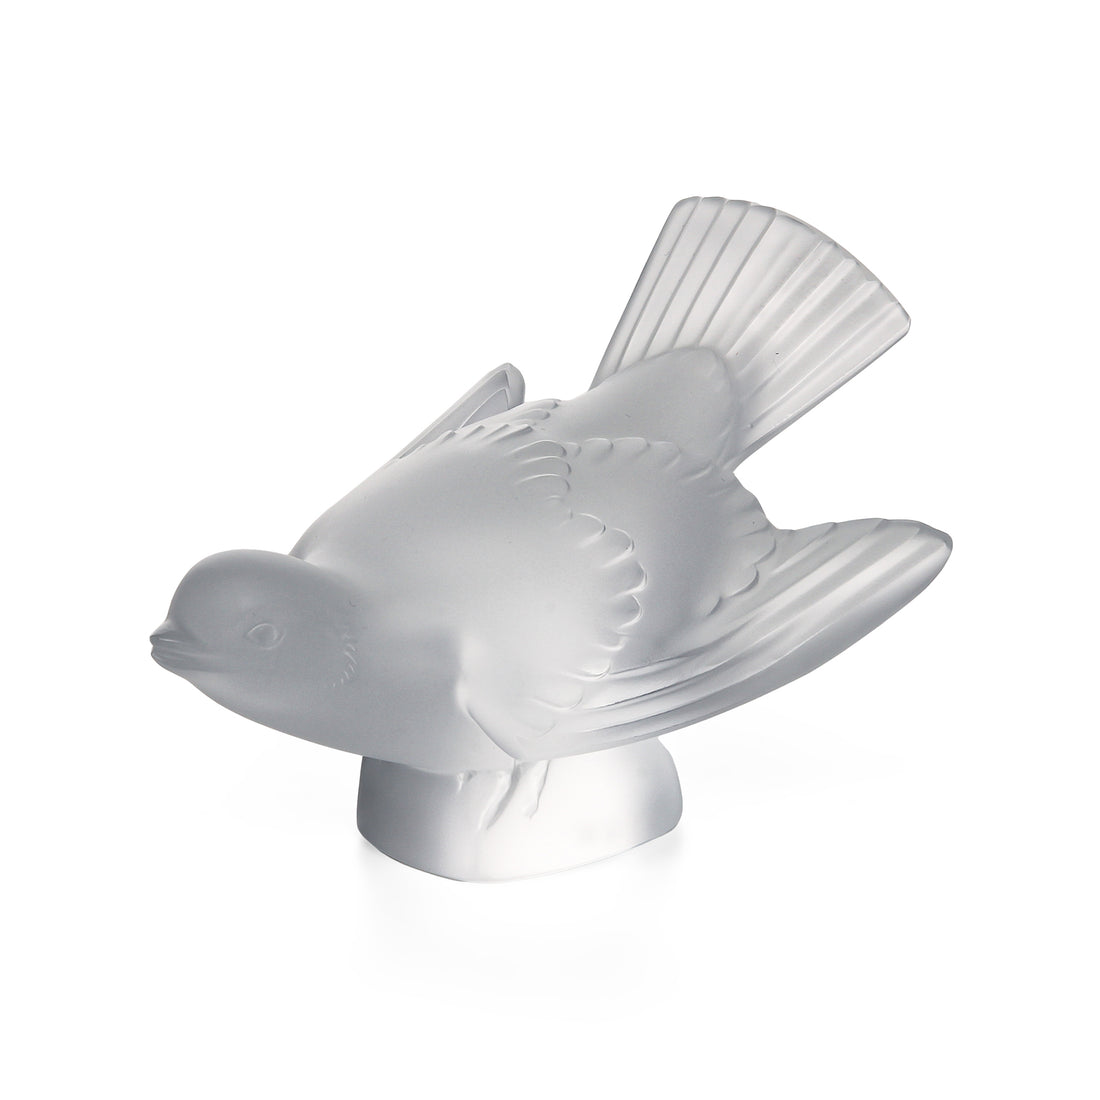 LALIQUE Sparrow Wings Out 11633 Figurine